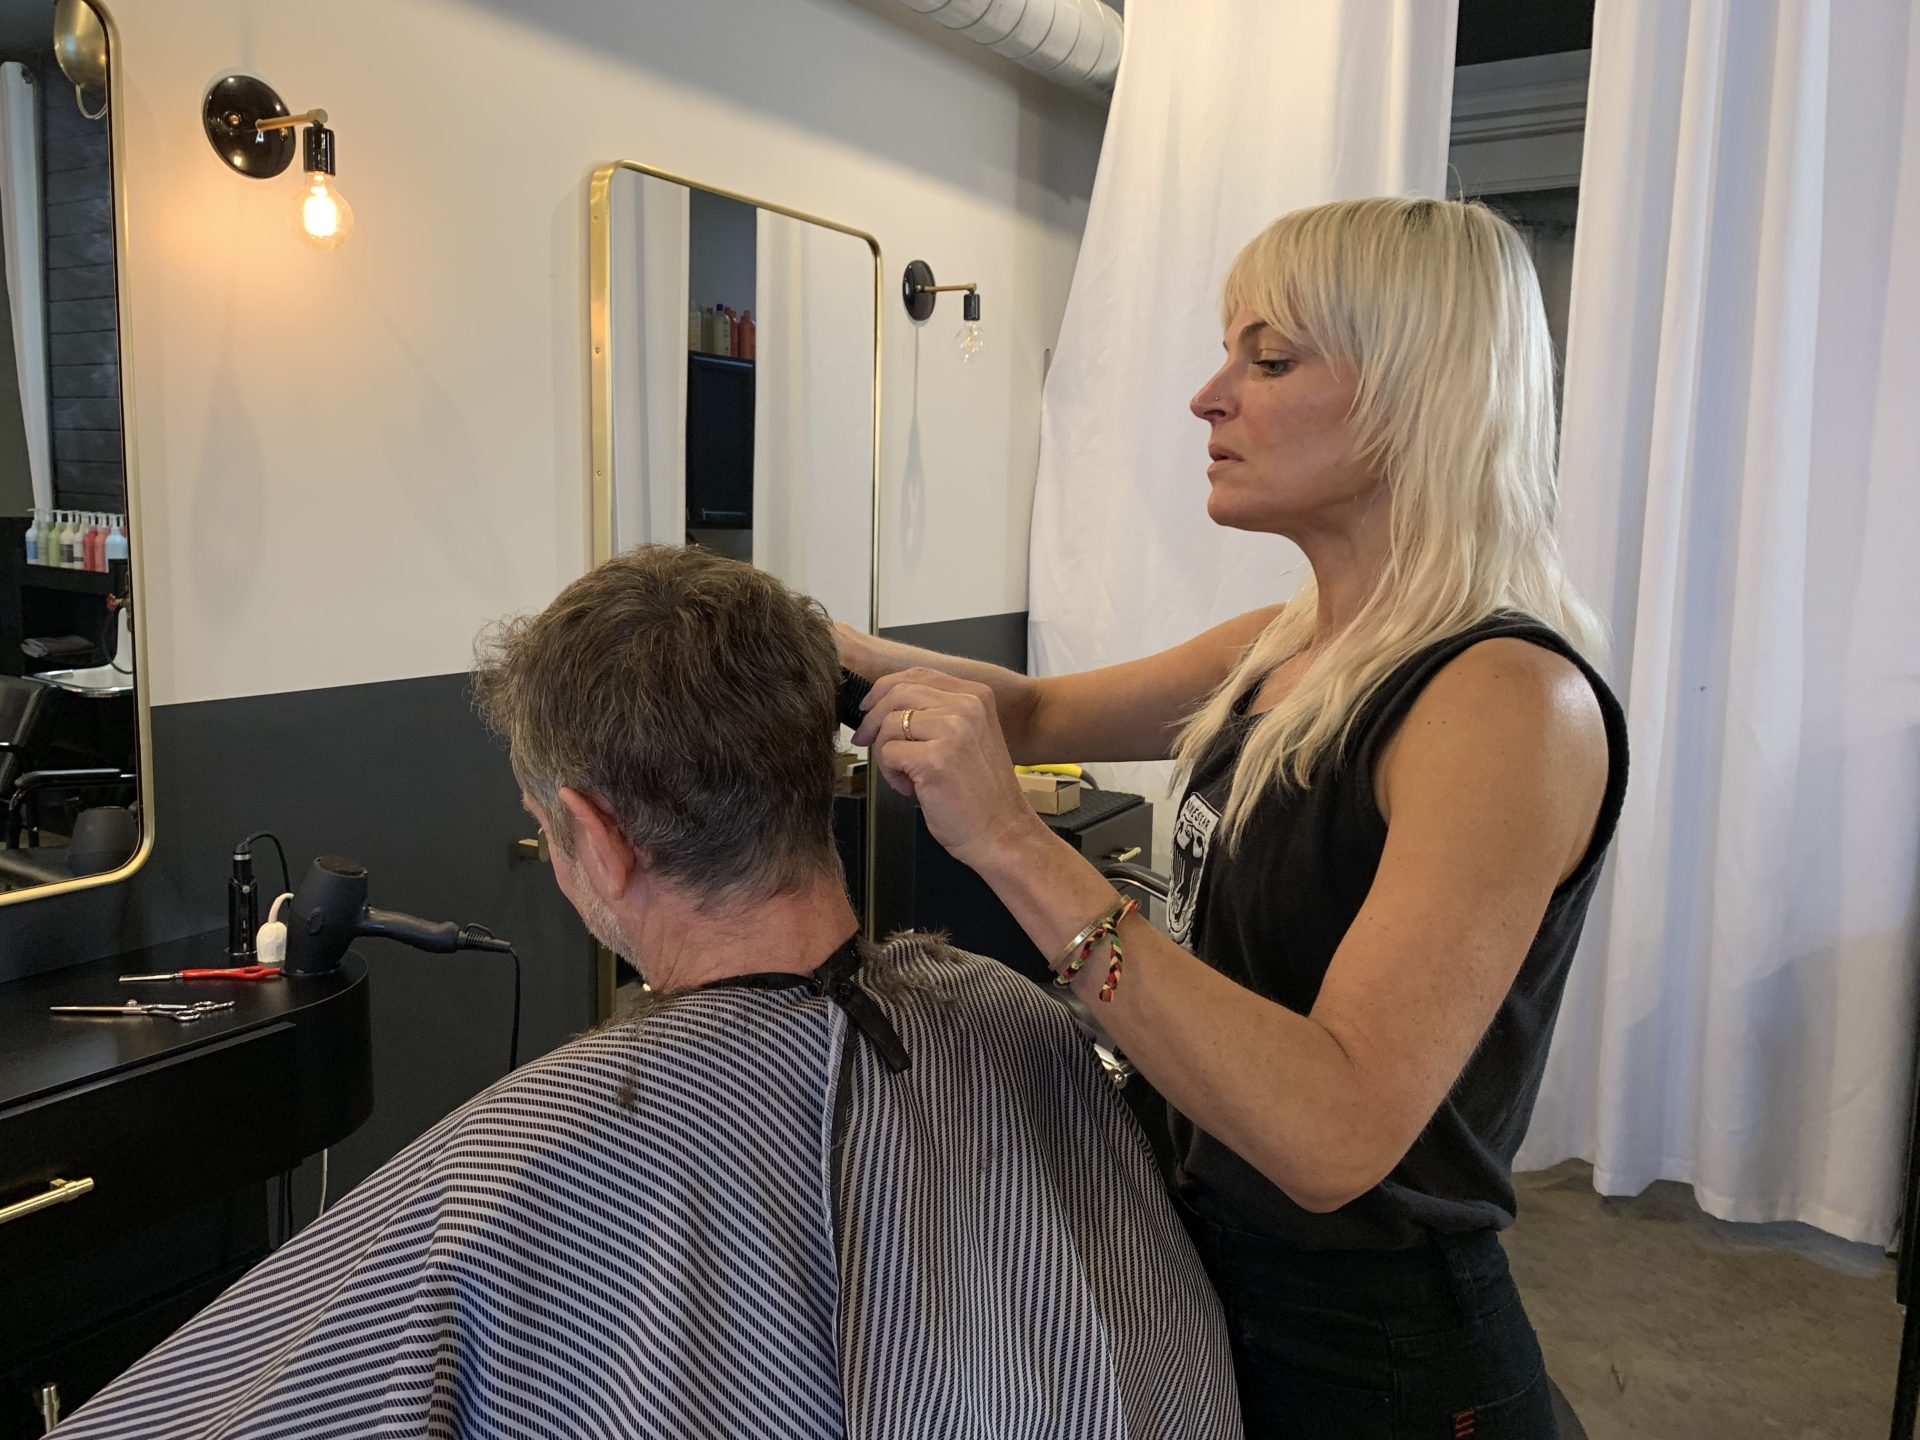 Workers are switching jobs more than ever, but here's why your hairstylist  might be stuck | WITF